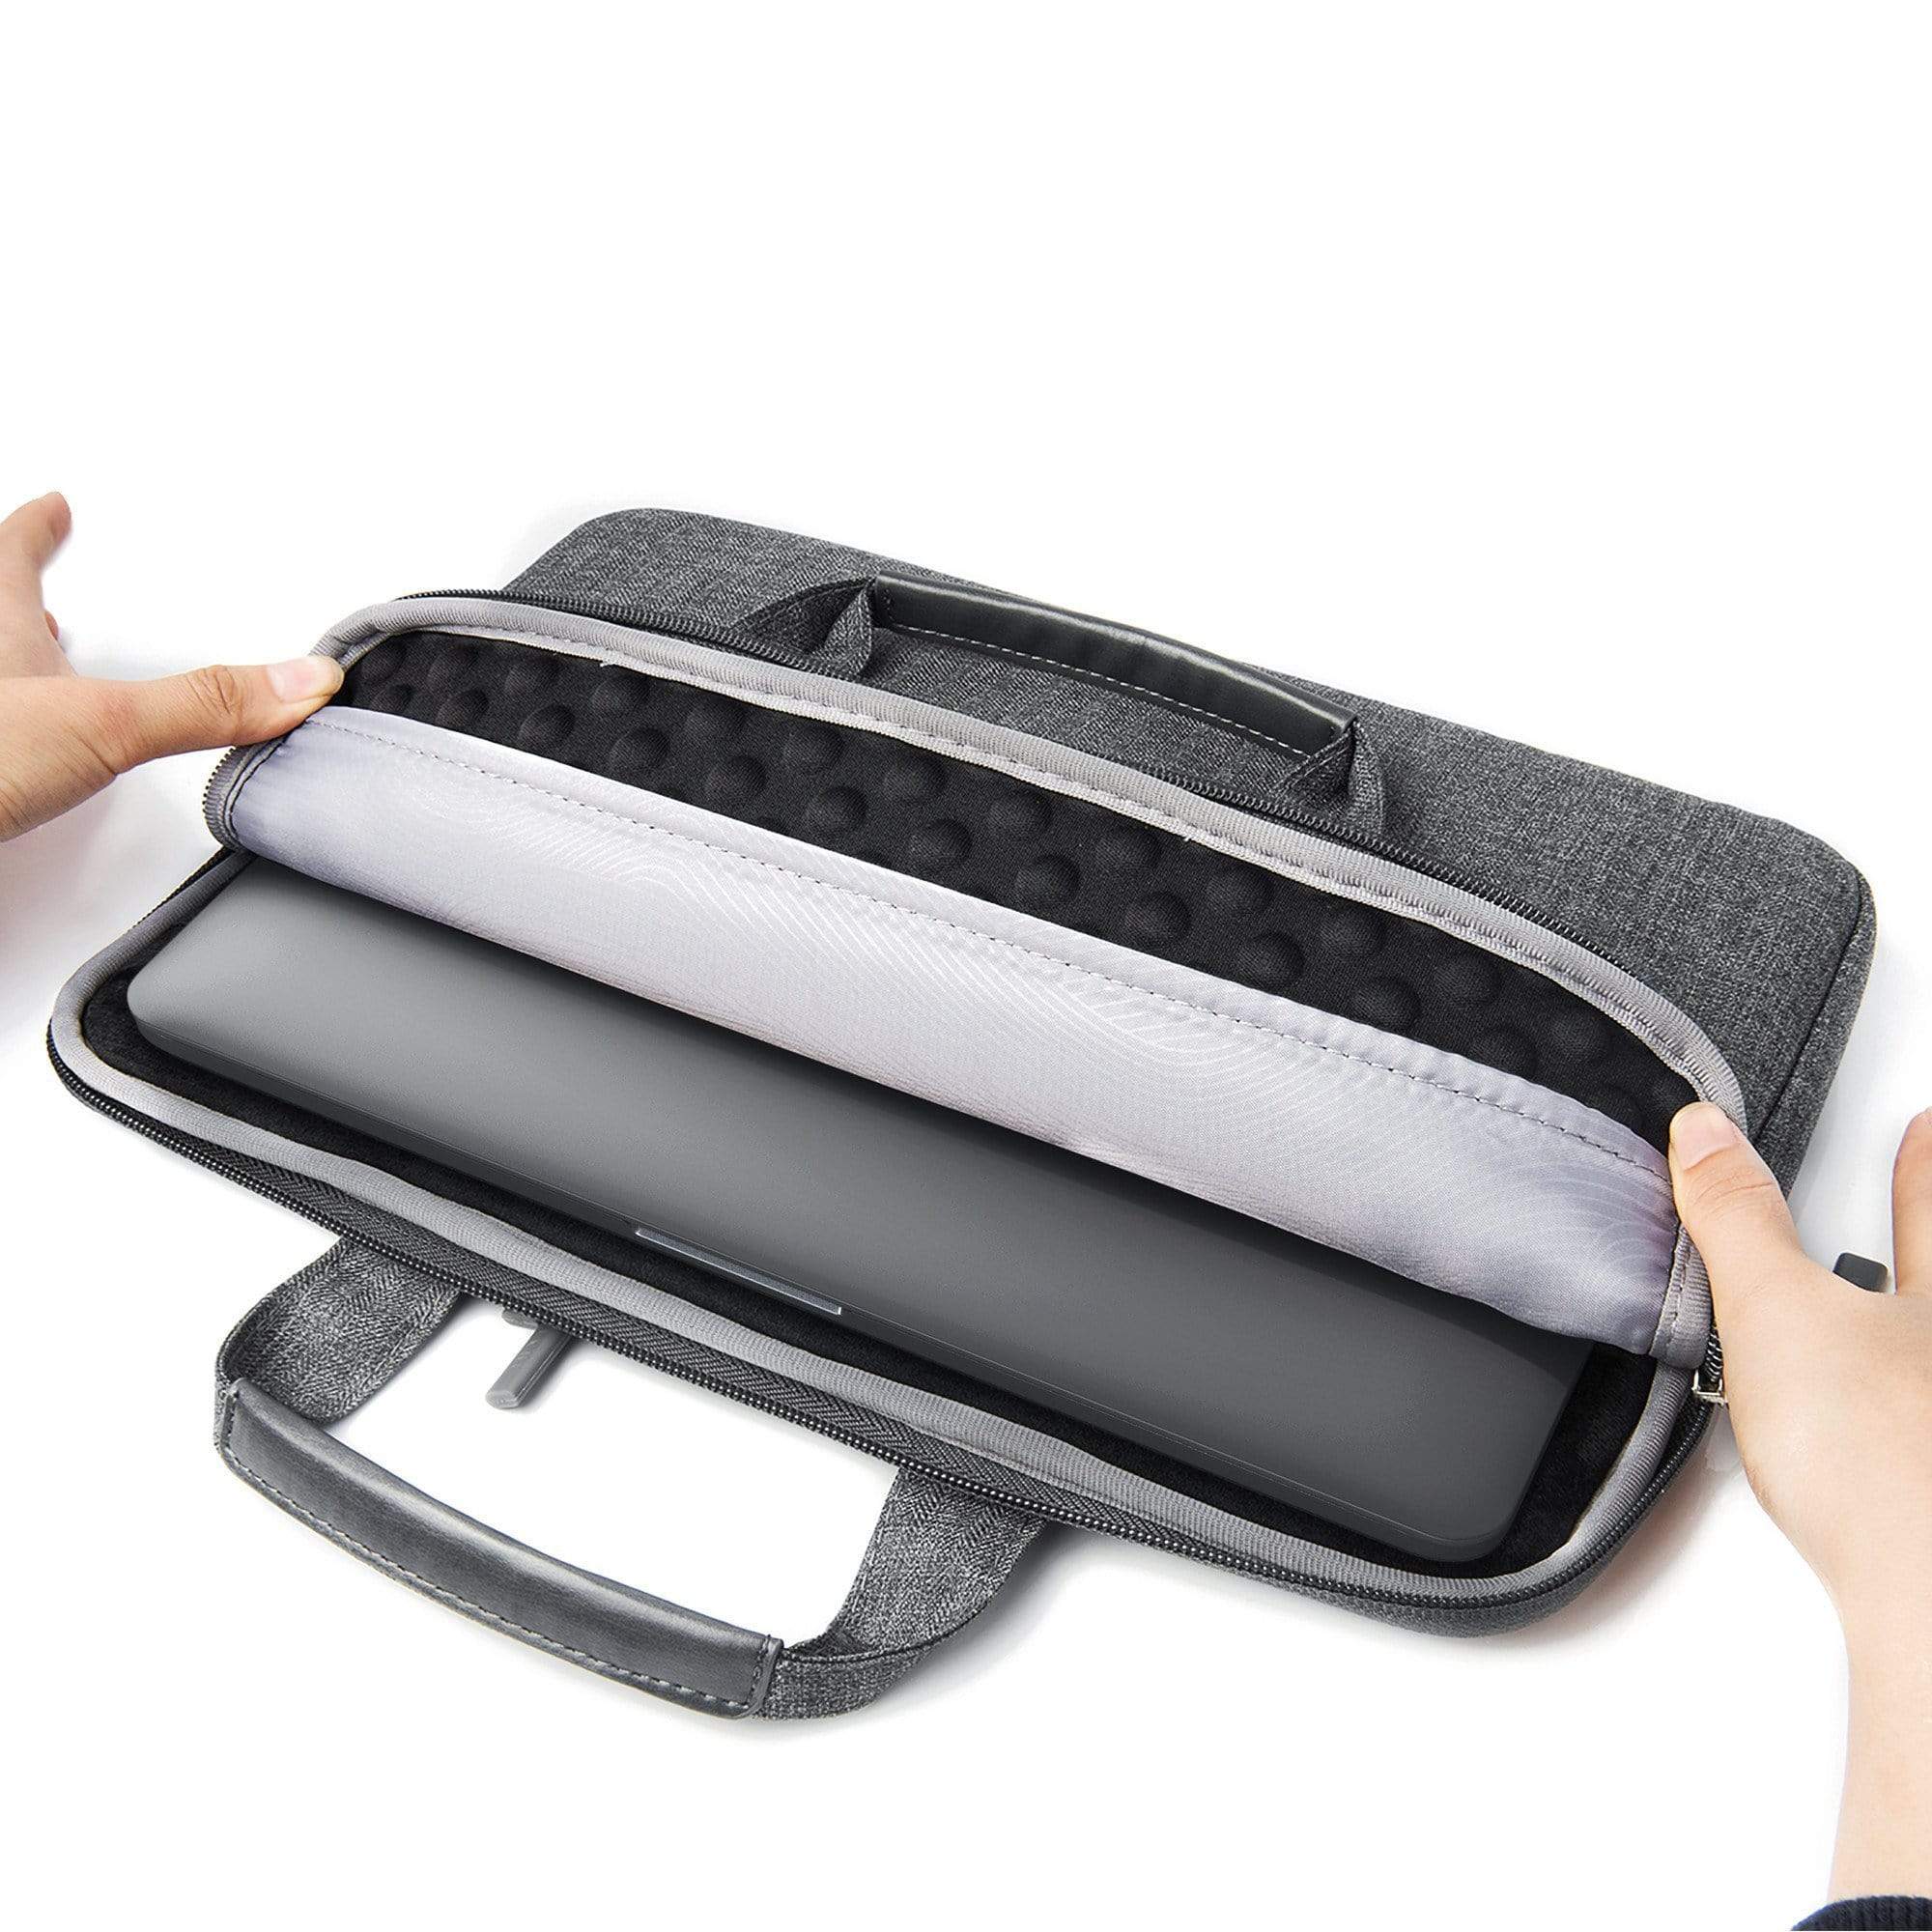 Water-Resistant Laptop Carrying Case with Pockets Other Satechi 13-Inch